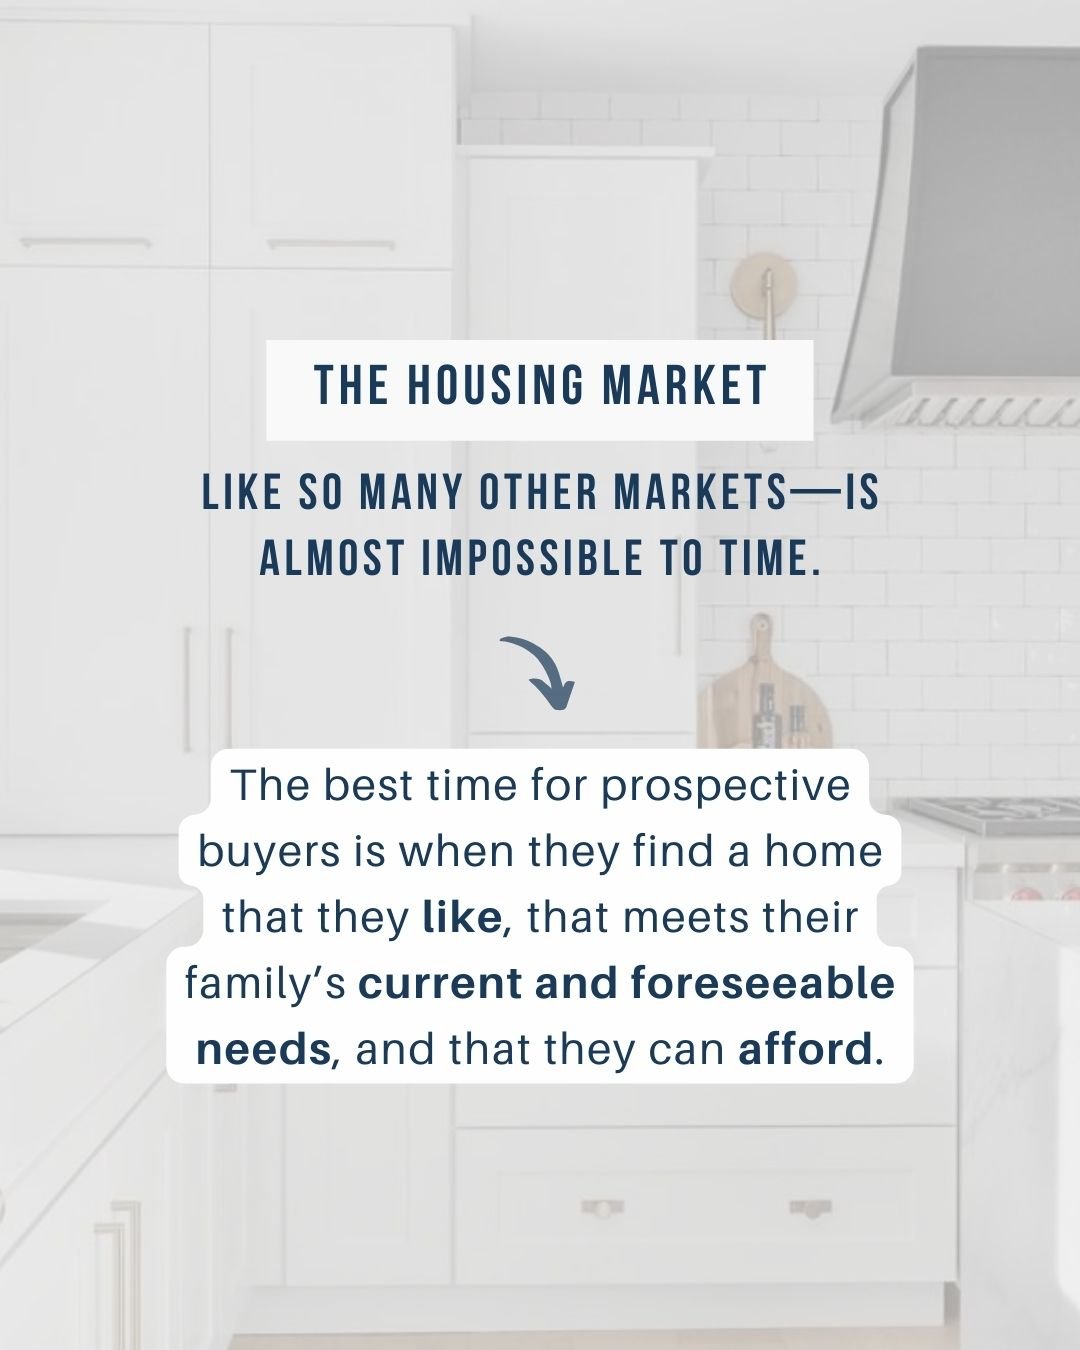 Don&rsquo;t skip this part!

It can be easy for buyers to fall into the trap of trying to time the market.

But unless you have a crystal ball, timing the housing market just isn&rsquo;t possible because there are too many variables and unknowns. 

S